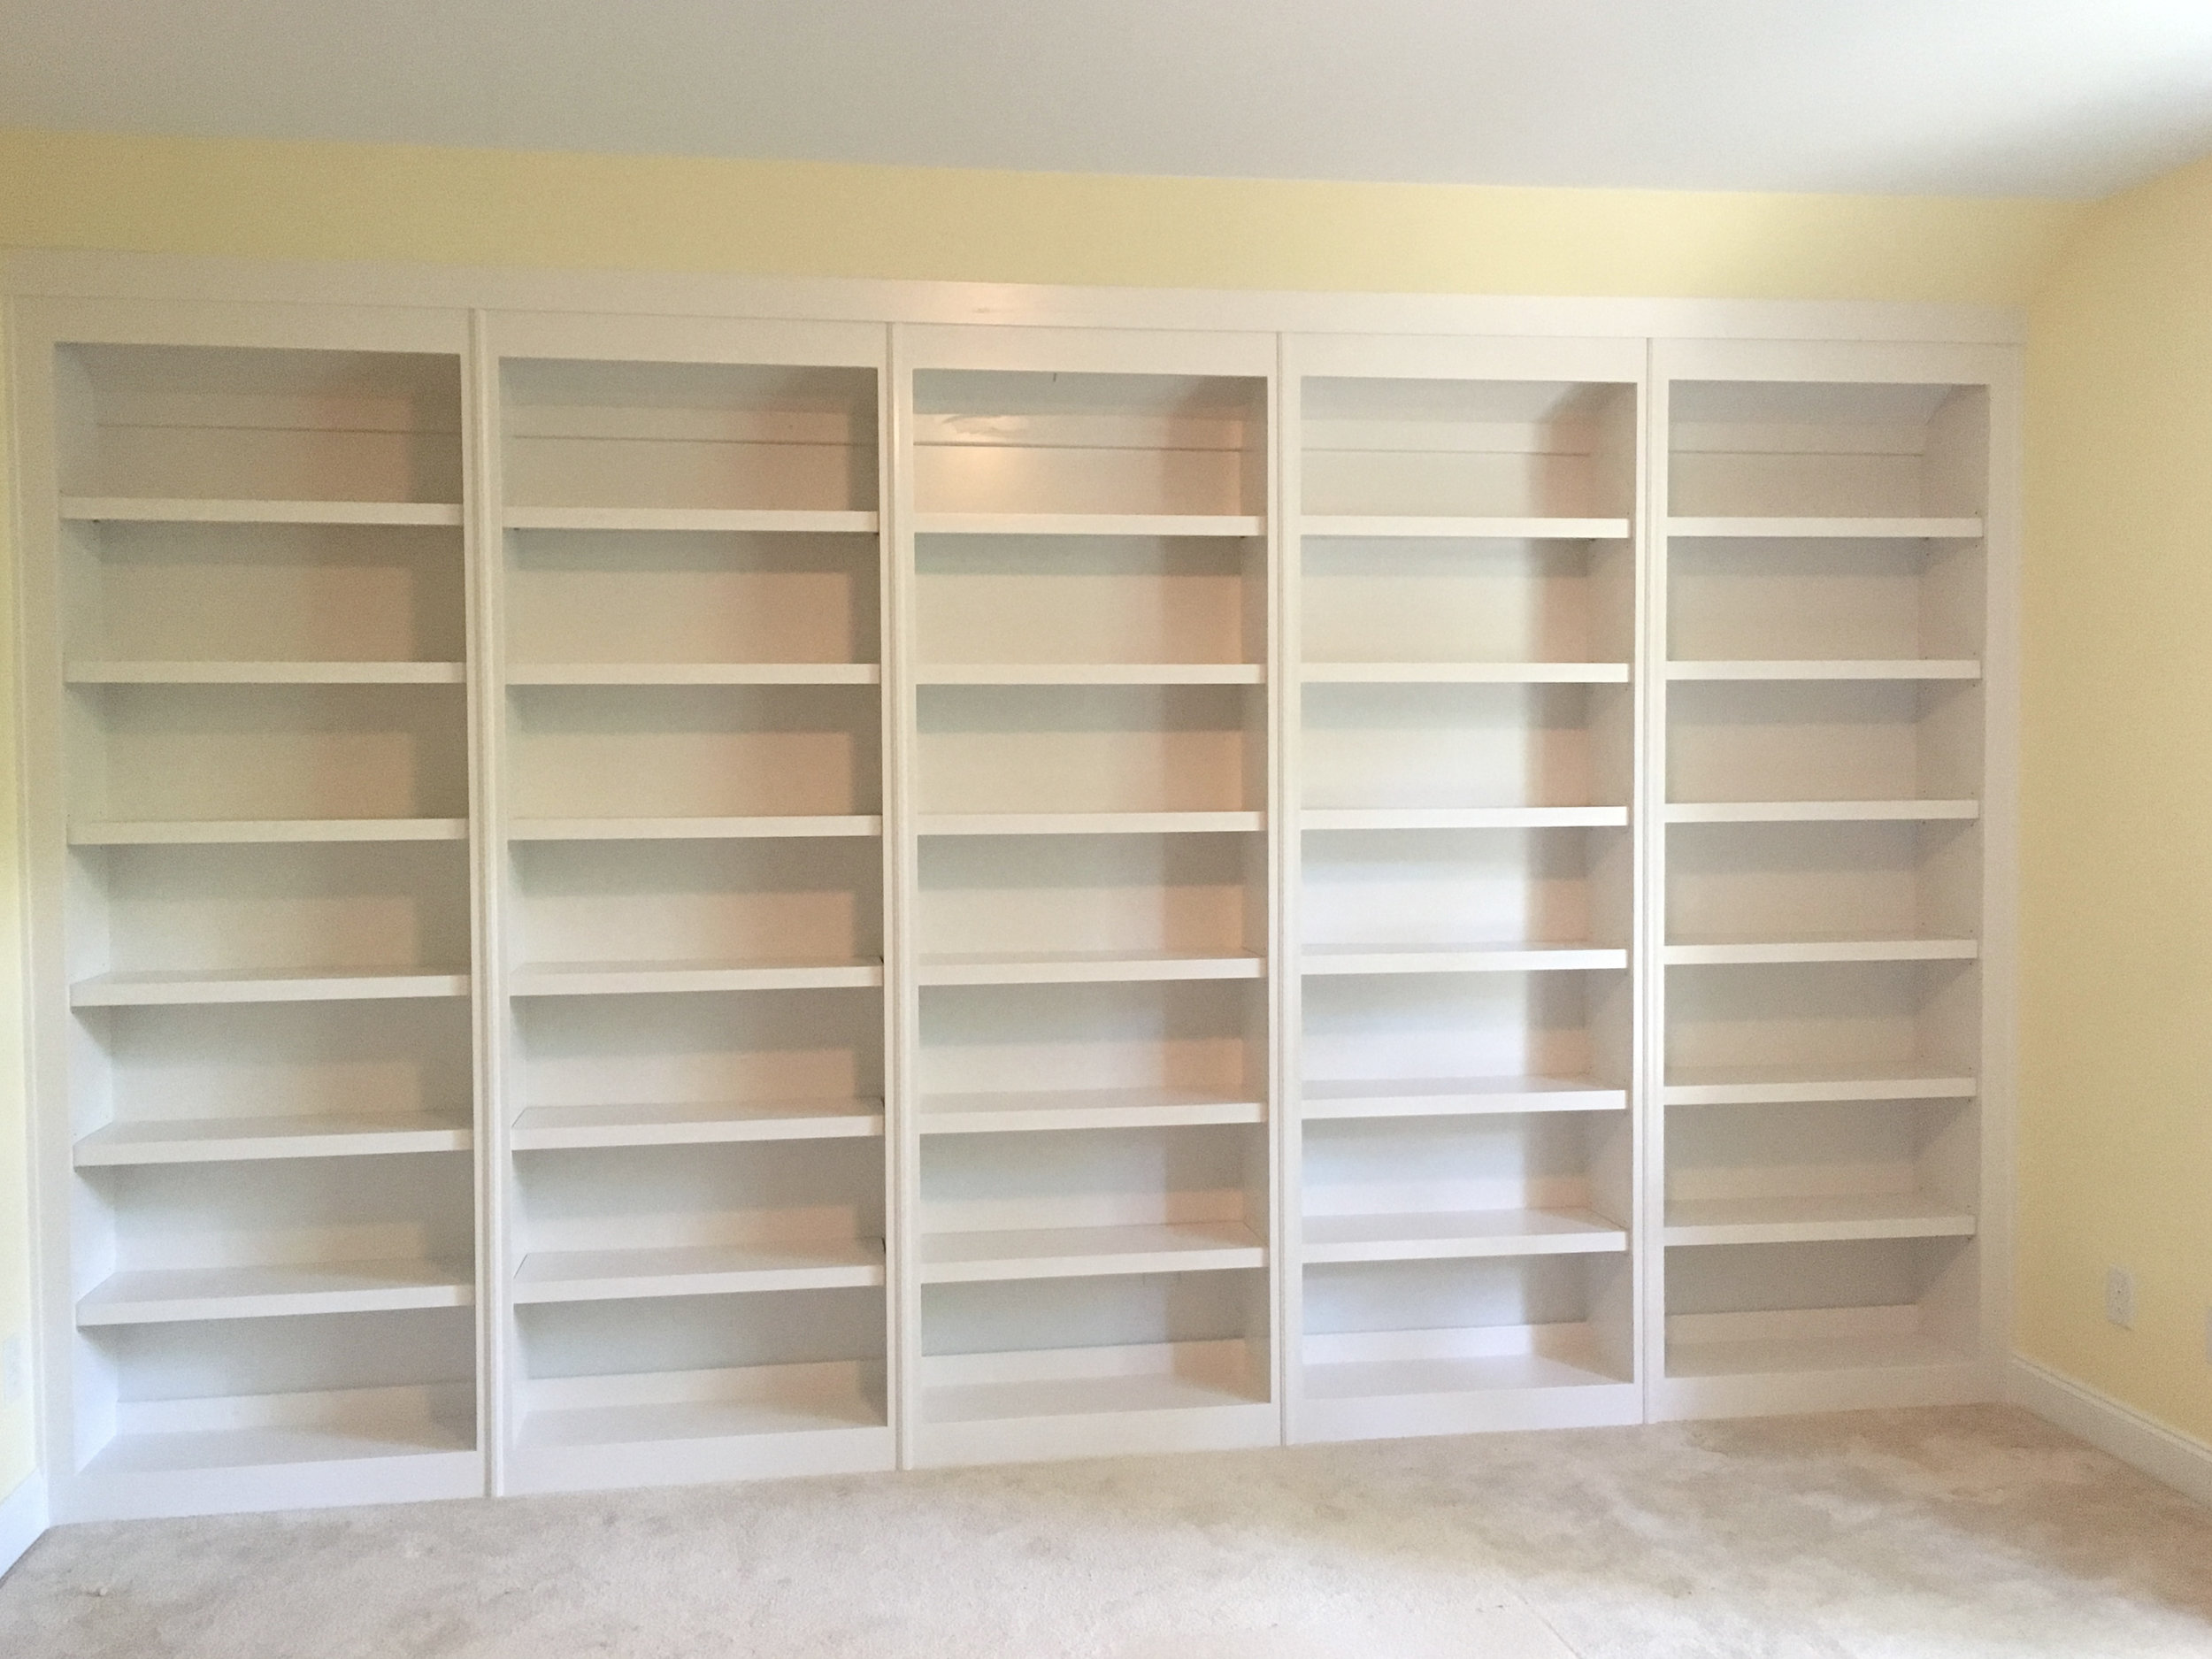 Custom Bookcases - Built-in Bookcases - Raleigh, Wake Forest ...